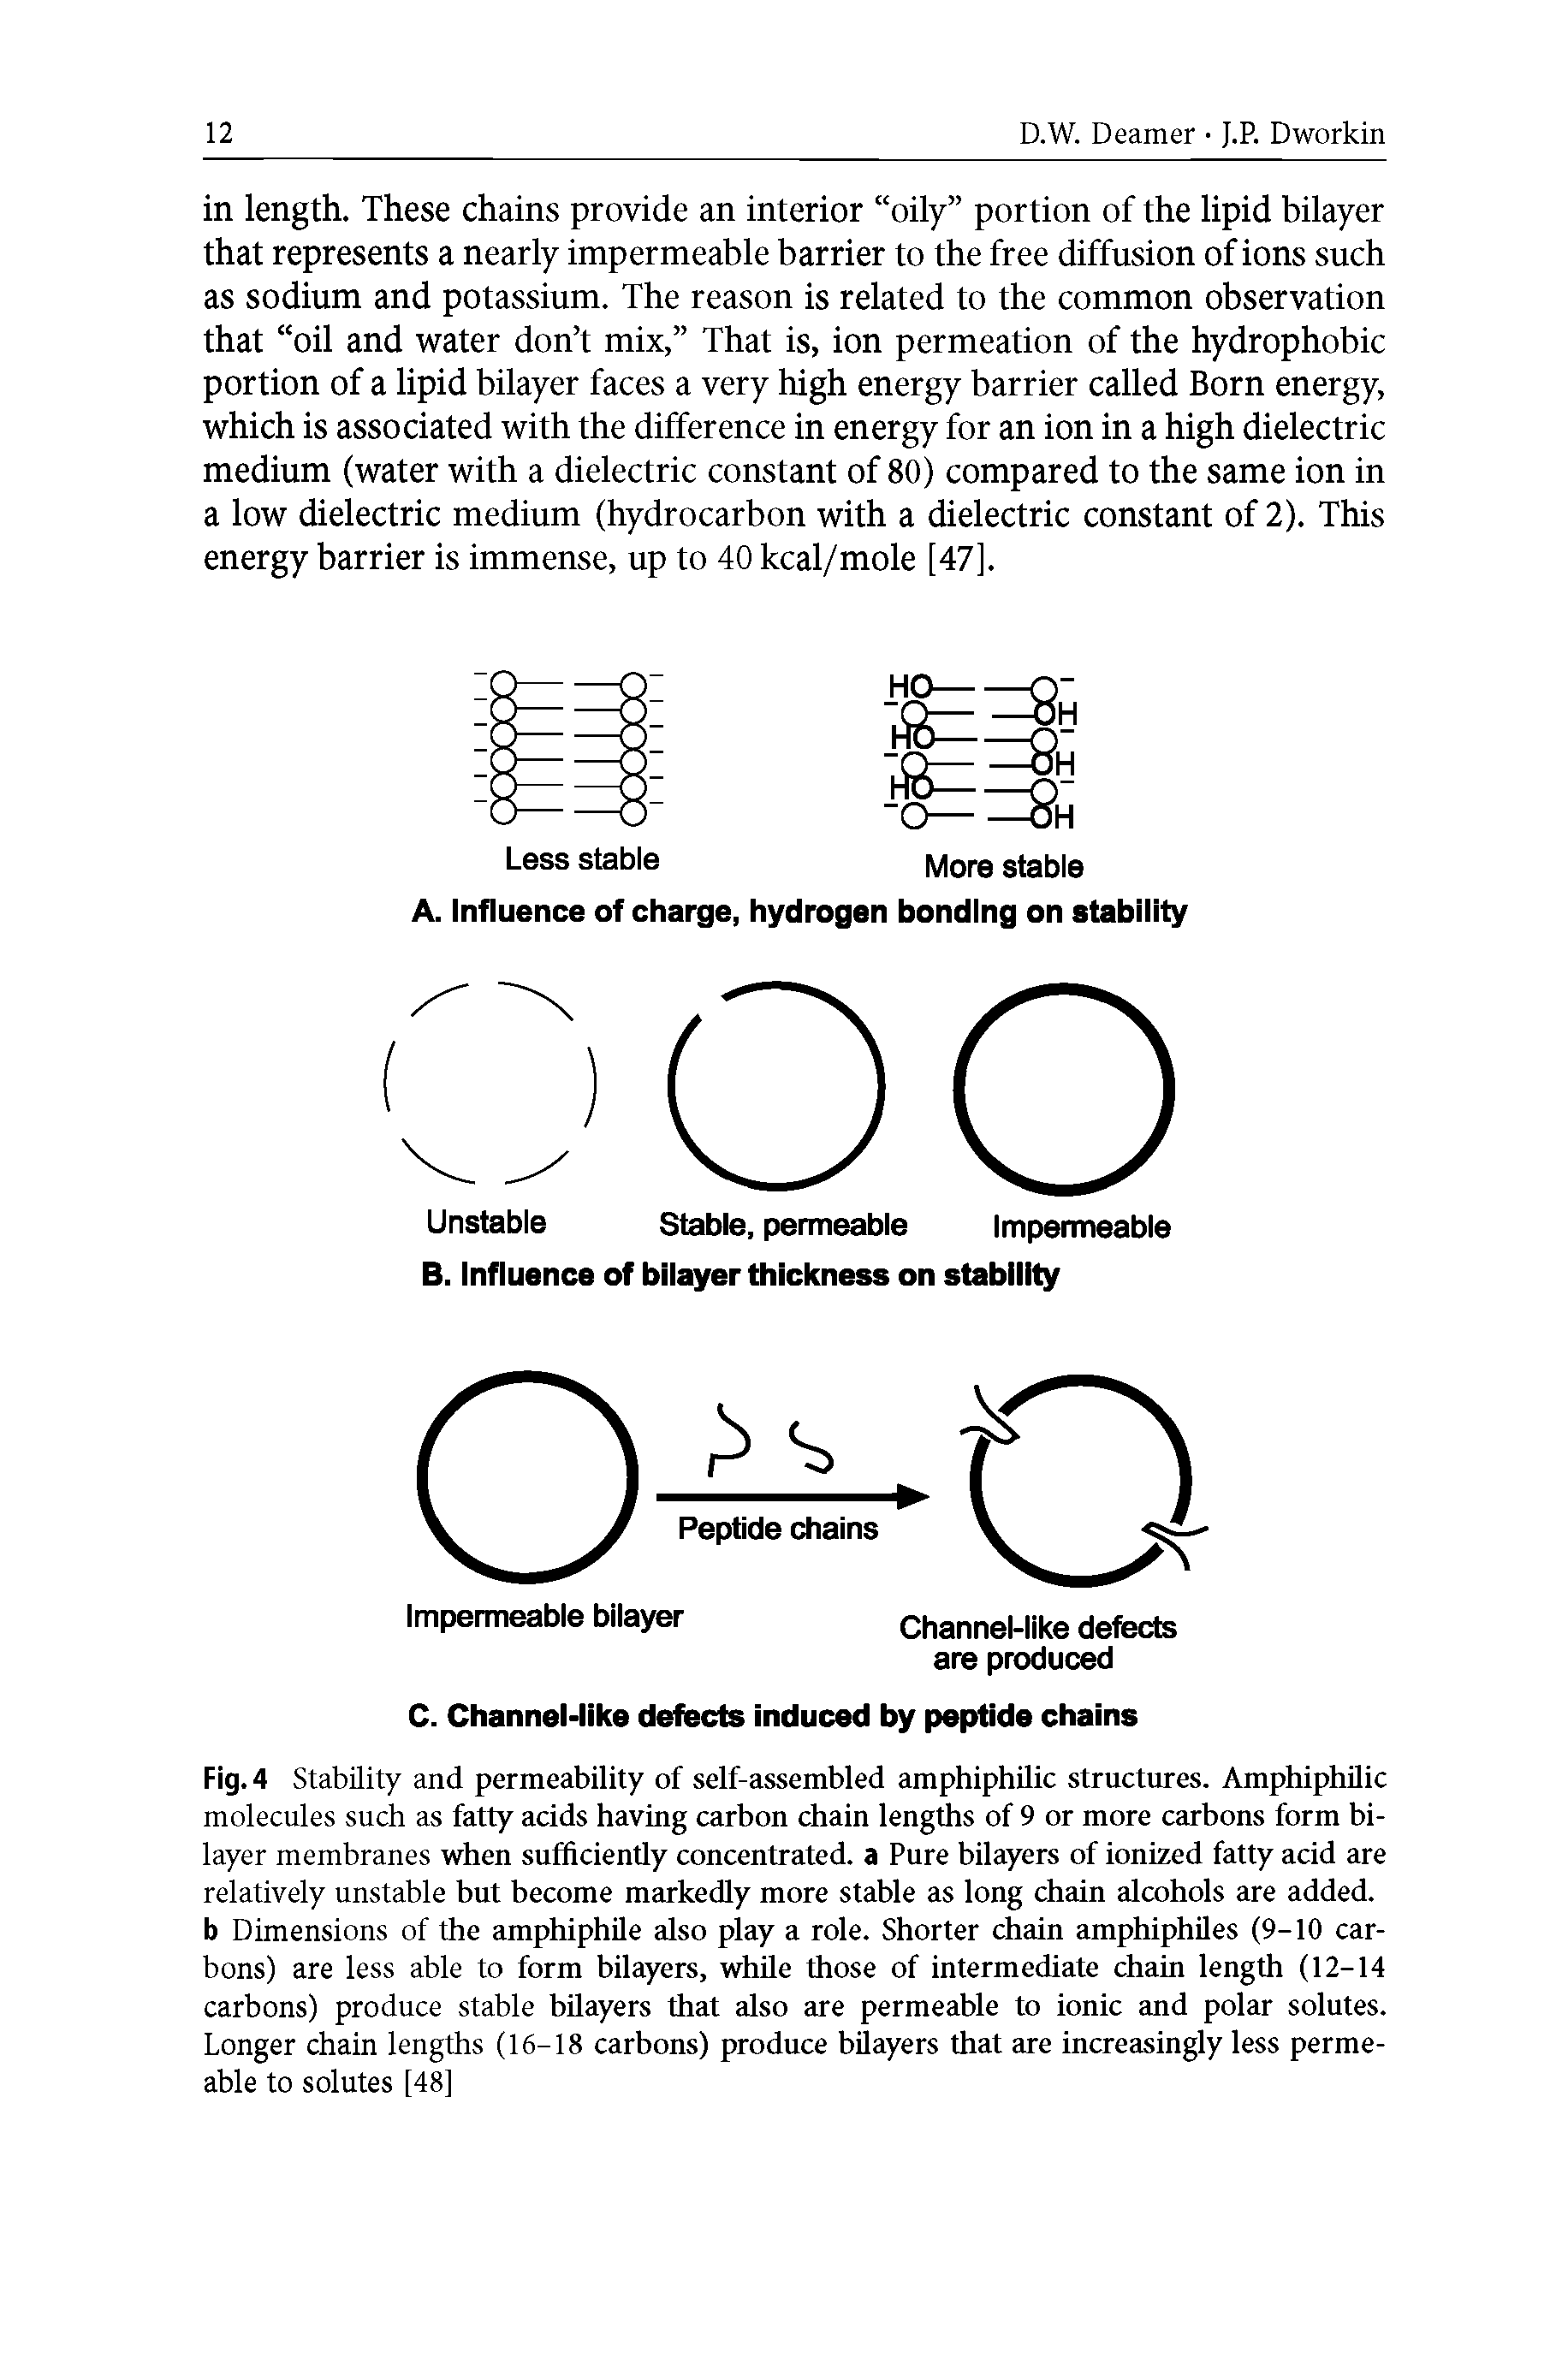 Fig. 4 Stability and permeability of self-assembled amphiphilic structures. Amphiphilic molecules such as fatty acids having carbon chain lengths of 9 or more carbons form bilayer membranes when sufficiently concentrated, a Pure bilayers of ionized fatty acid are relatively unstable but become markedly more stable as long chain alcohols are added, b Dimensions of the amphiphile also play a role. Shorter chain amphiphiles (9-10 carbons) are less able to form bilayers, while those of intermediate chain length (12-14 carbons) produce stable bilayers that also are permeable to ionic and polar solutes. Longer chain lengths (16-18 carbons) produce bilayers that are increasingly less permeable to solutes [48]...